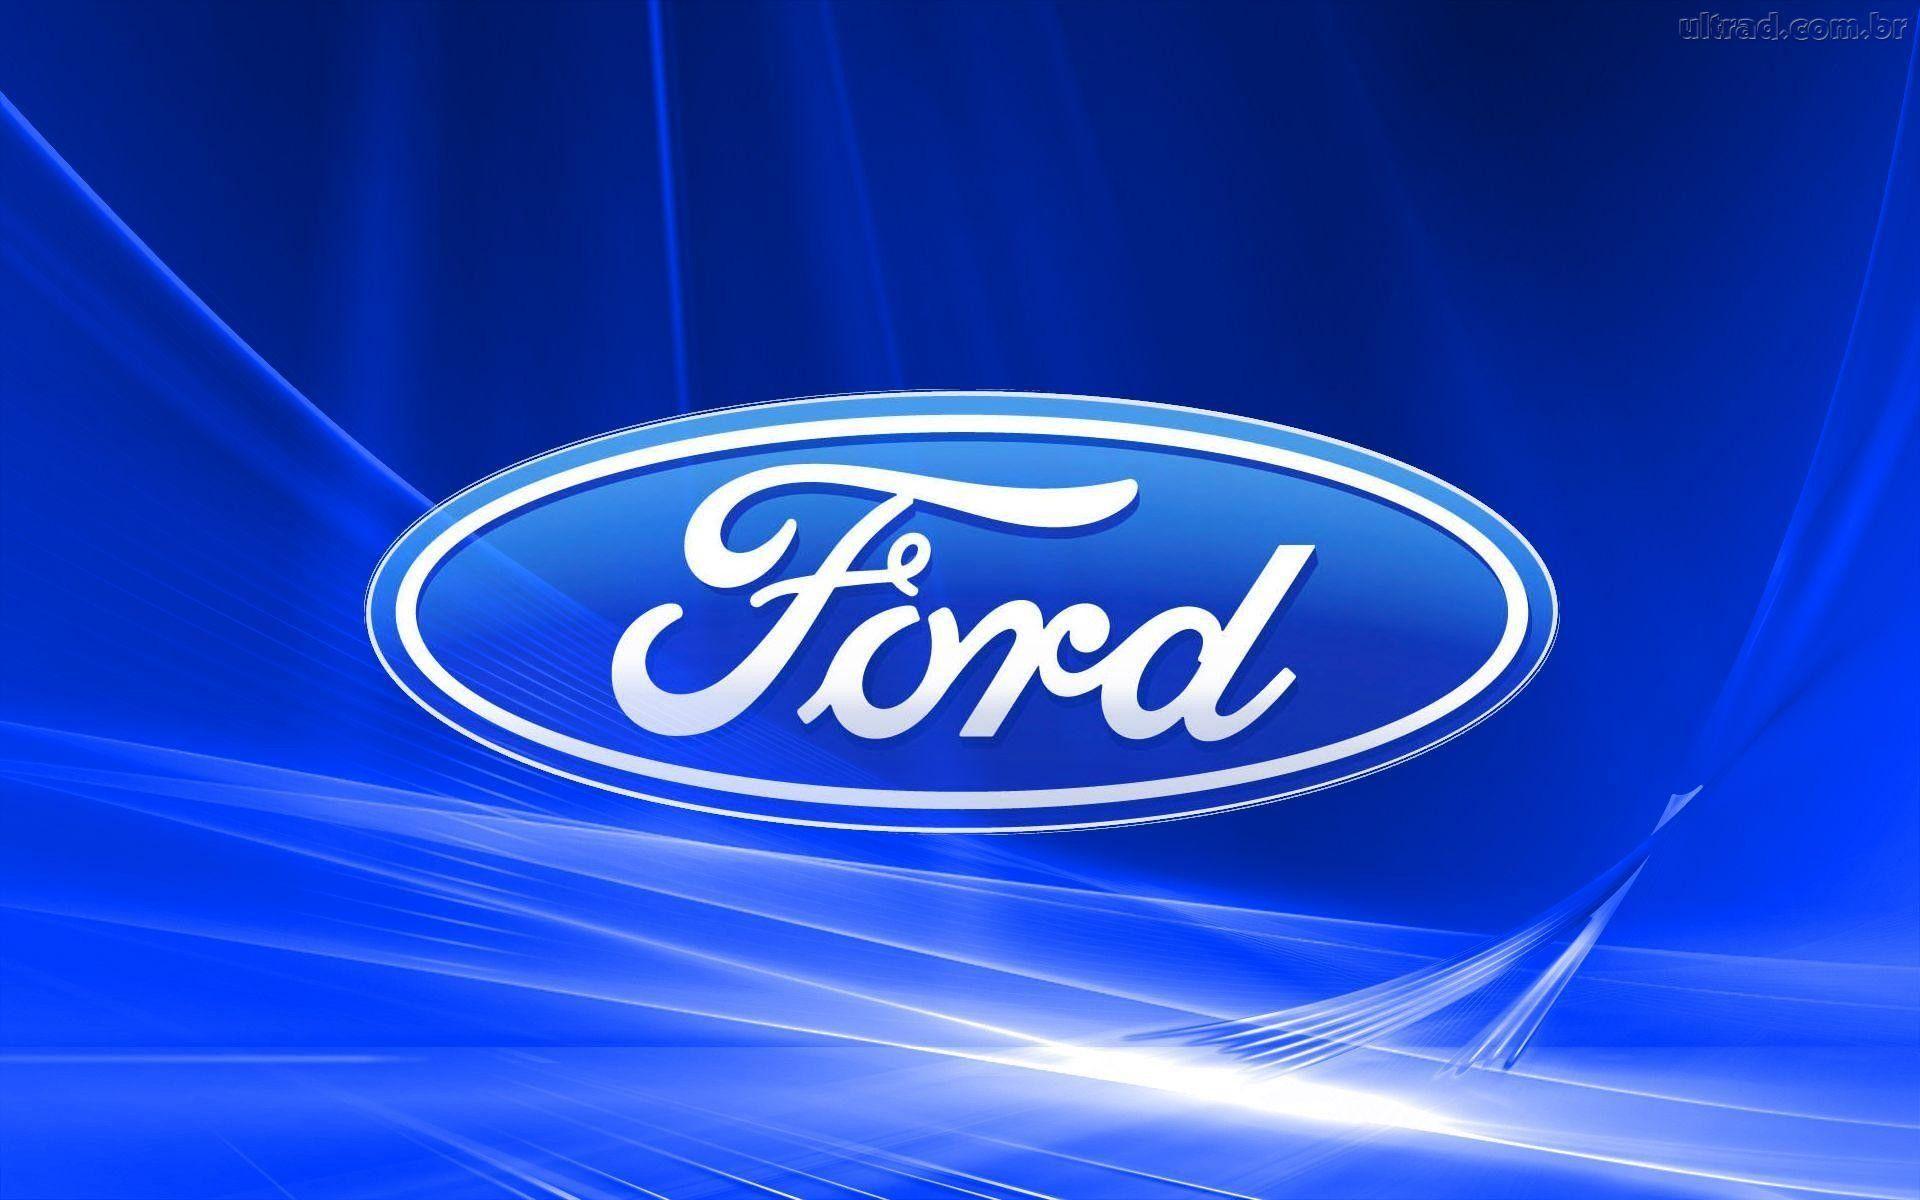 Ford Racing Wallpapers